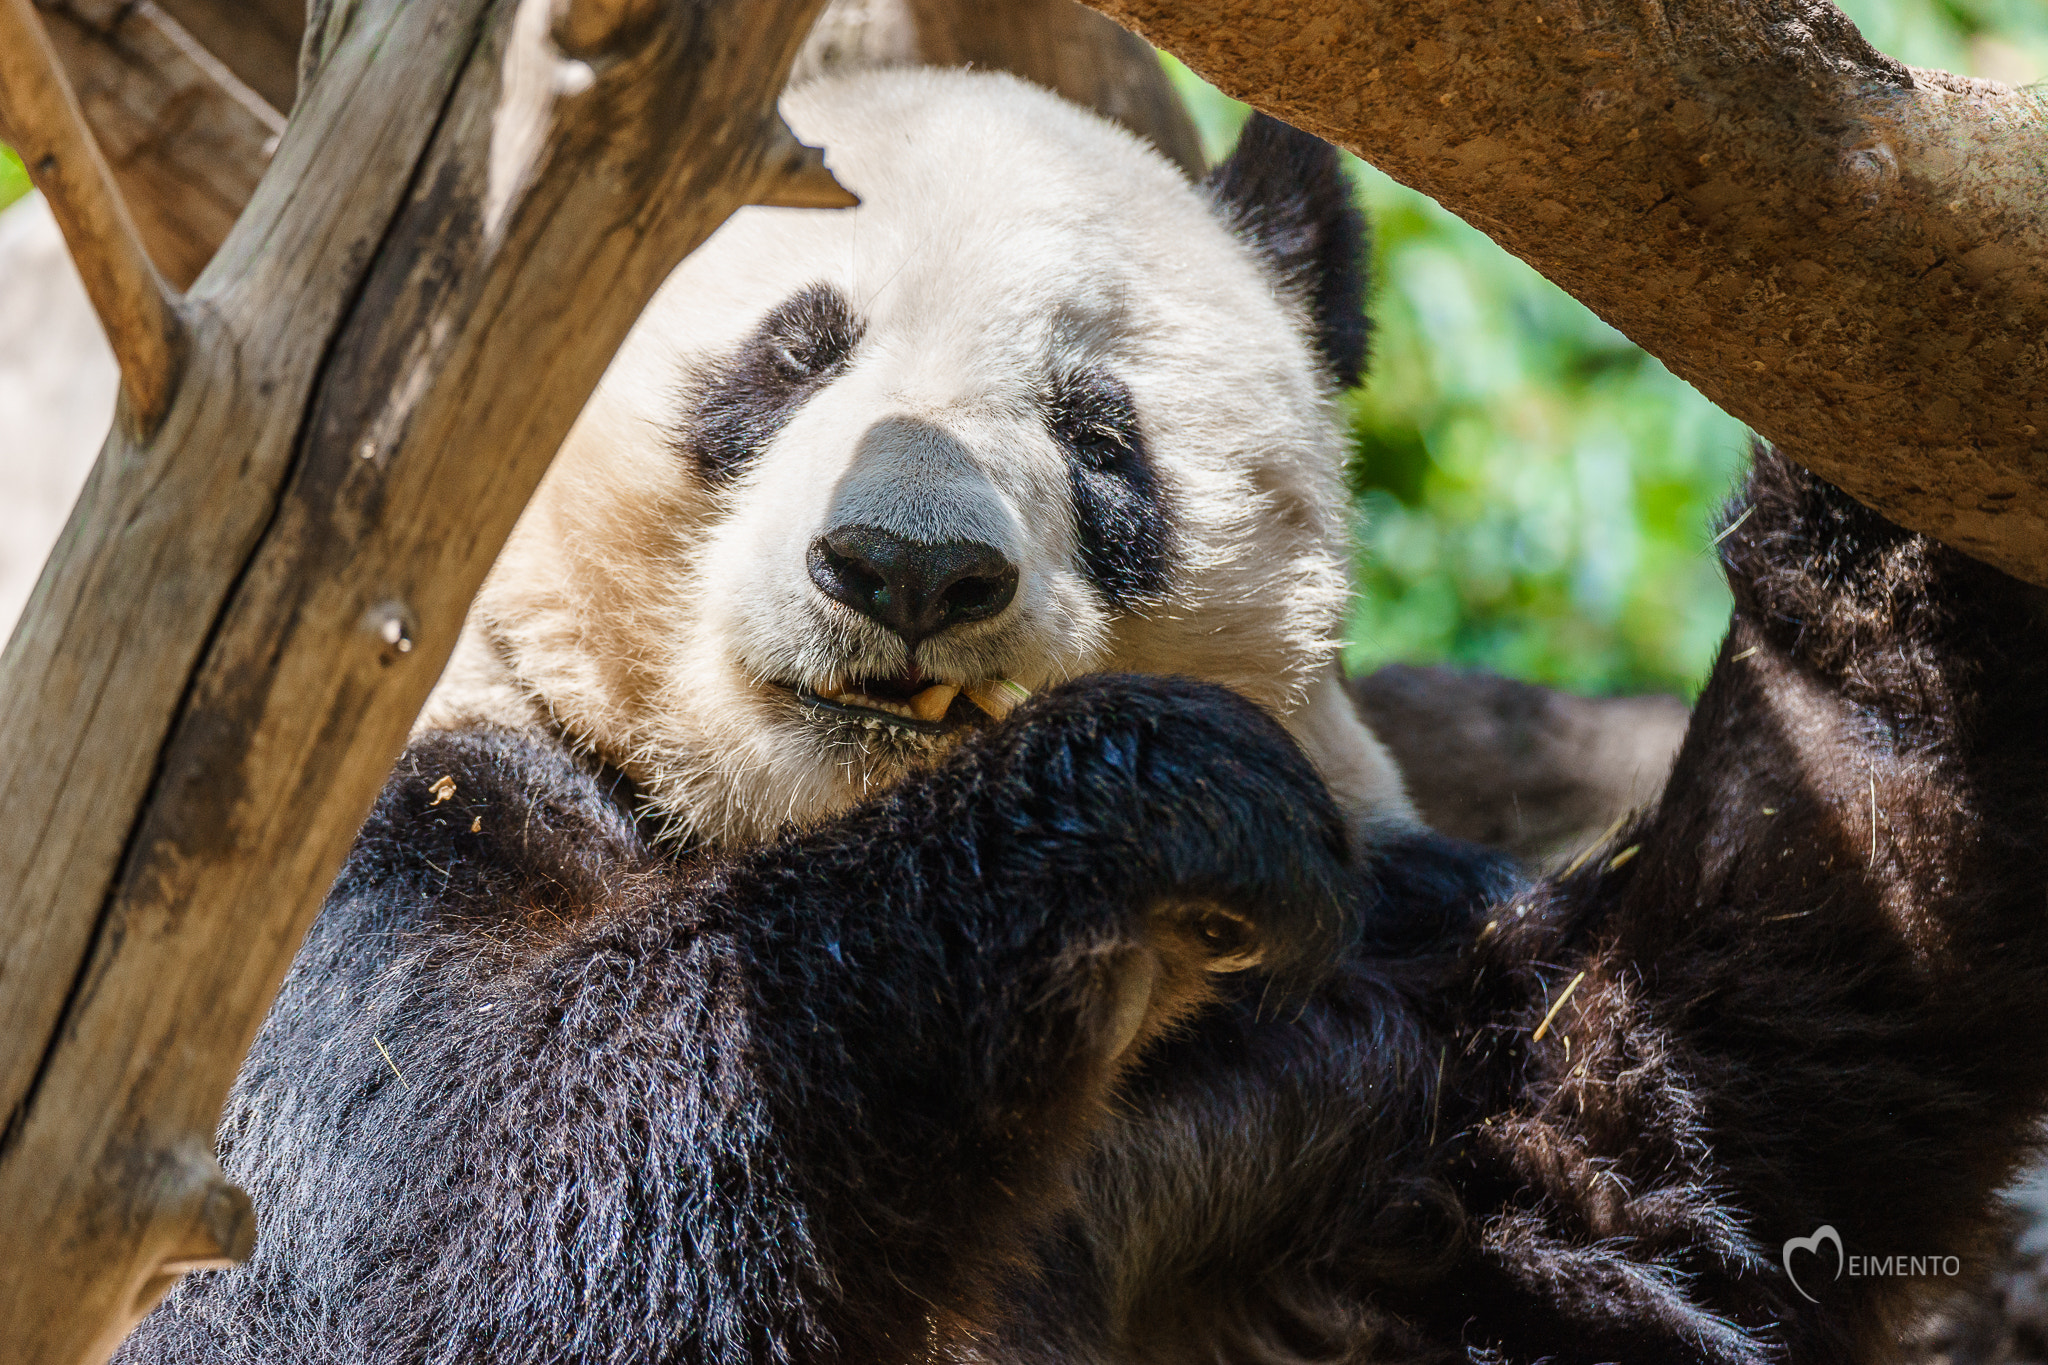 Sony a7 II sample photo. Giant panda lunch time! photography